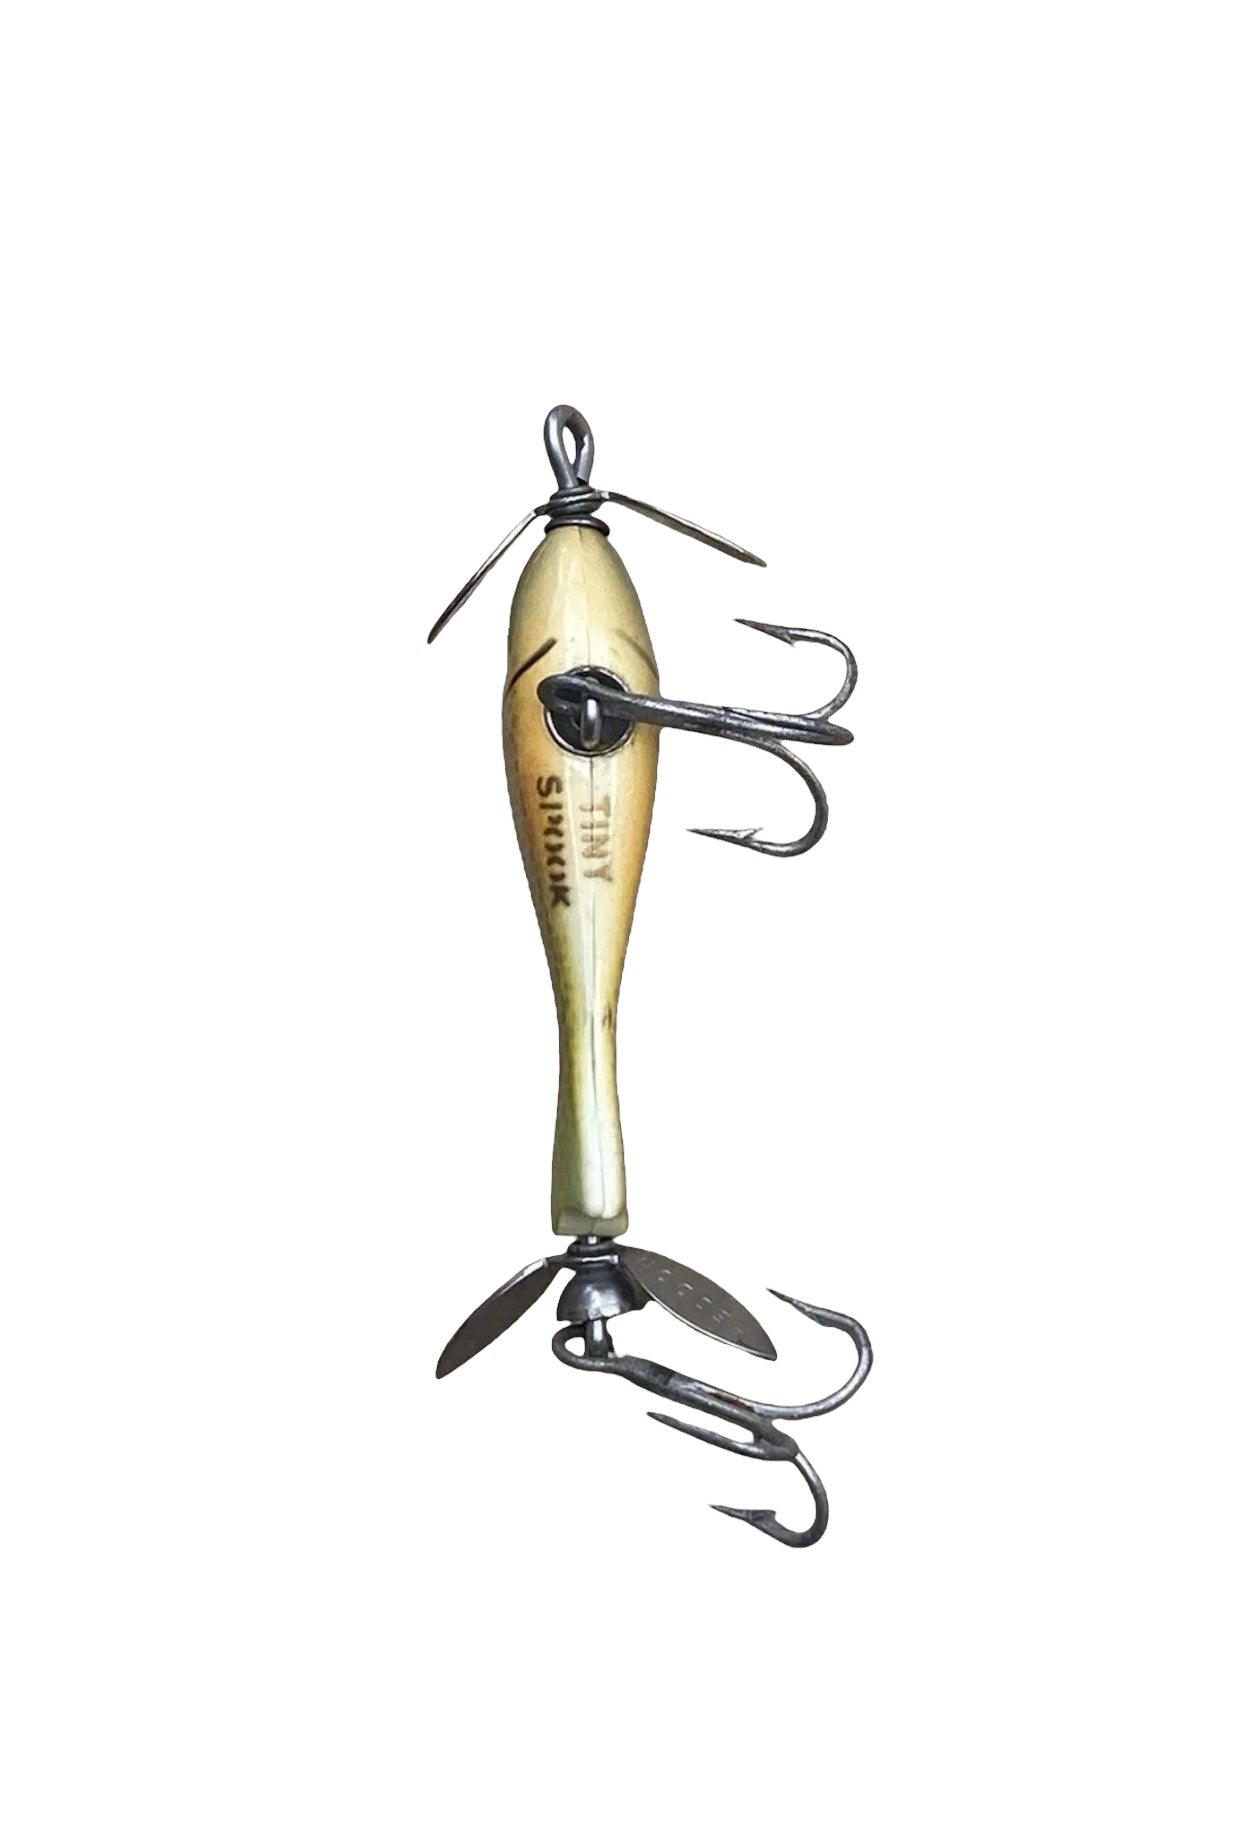 Heddon Tiny Spook 310 In Silver Shore or Silver Shiner